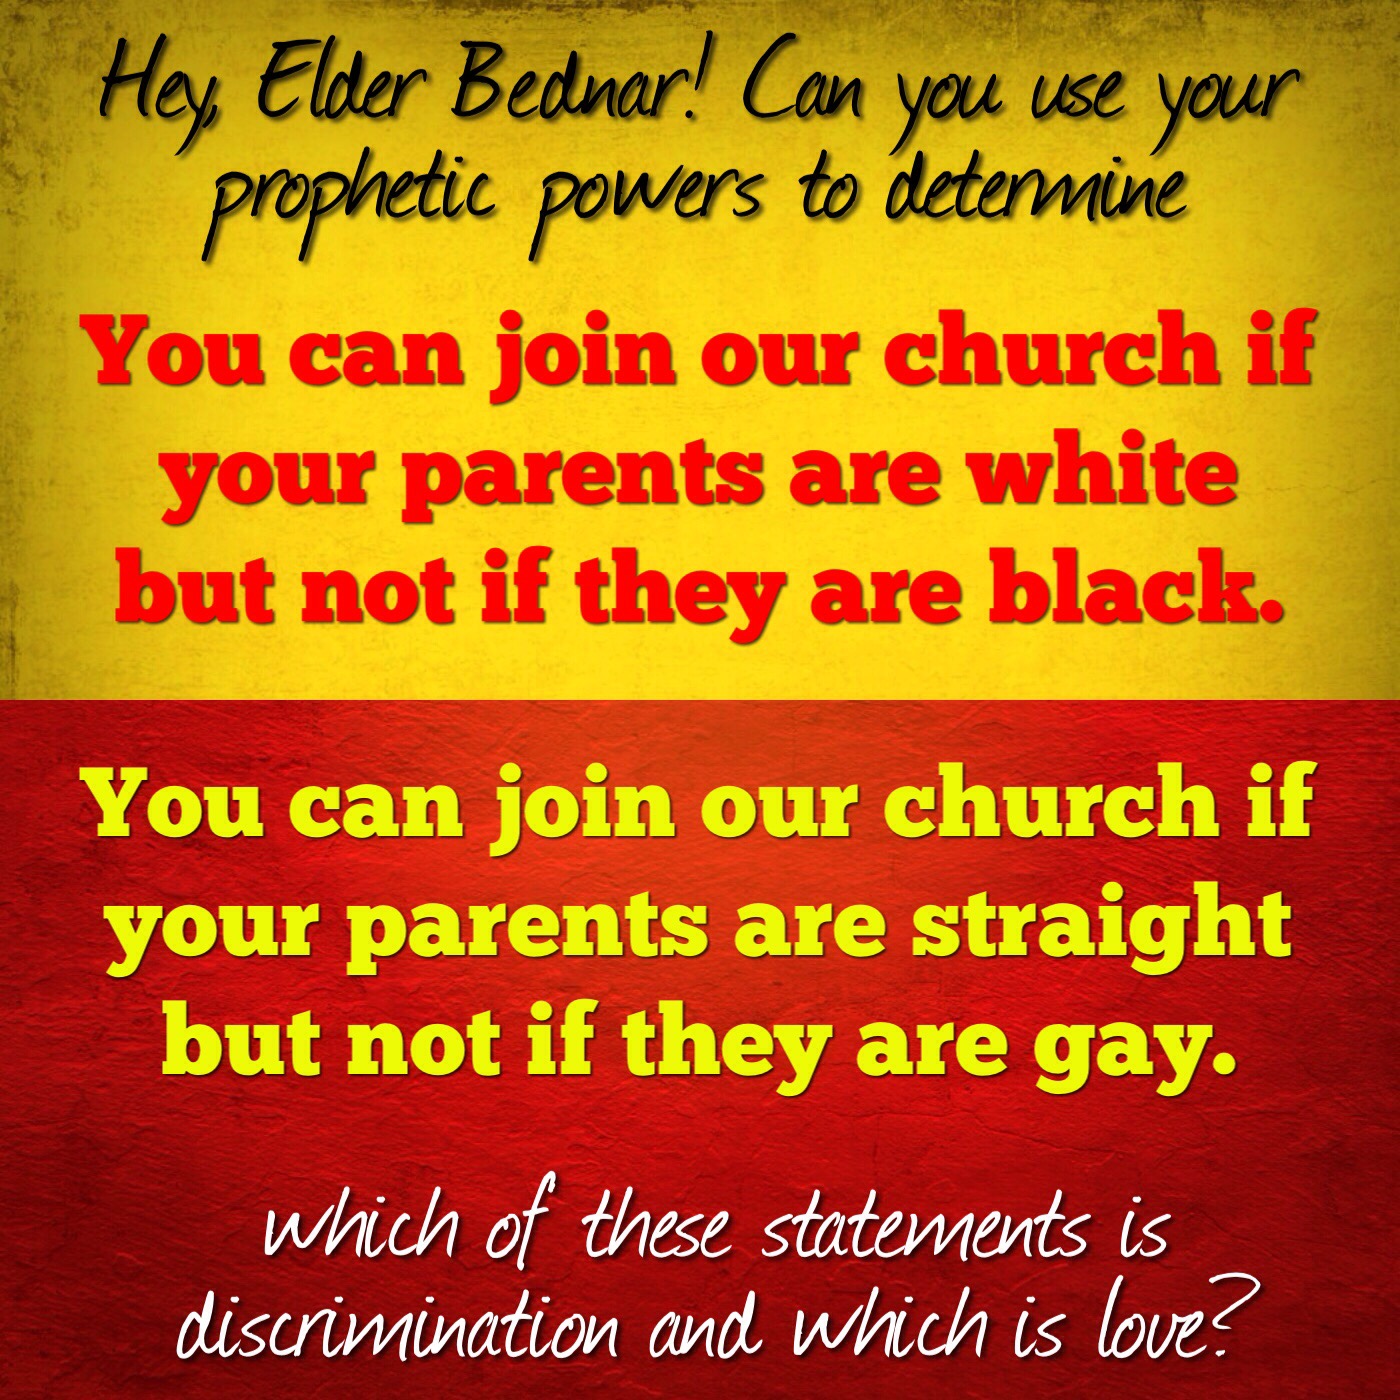 What is discrimination?